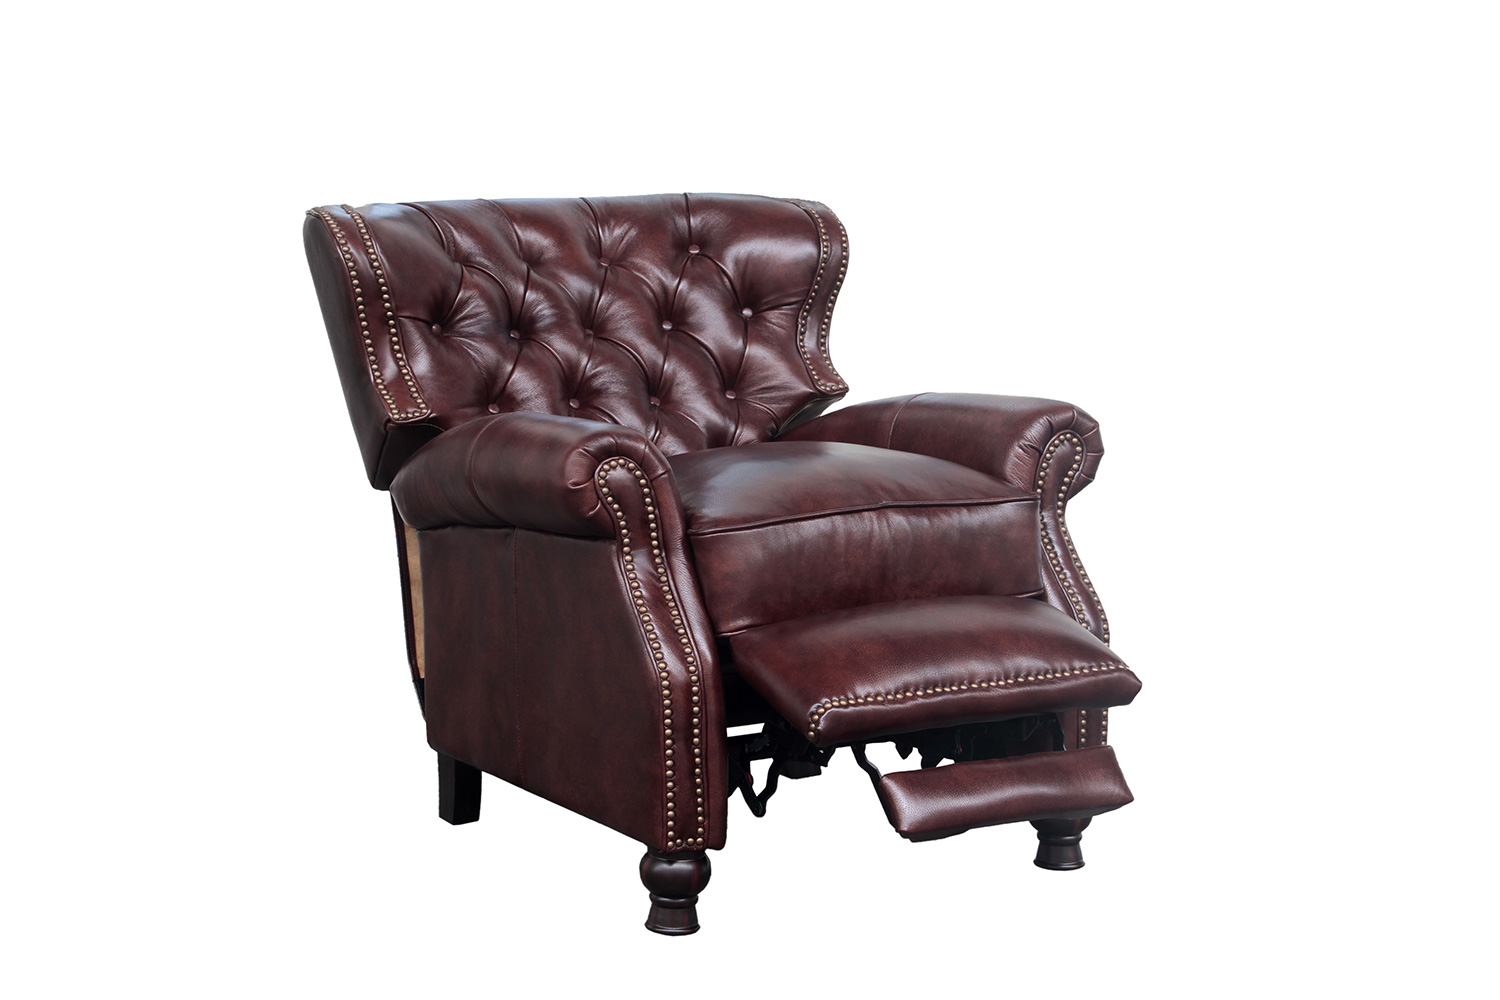 Barcalounger Presidential Recliner Chair - Wenlock Fudge/All Leather